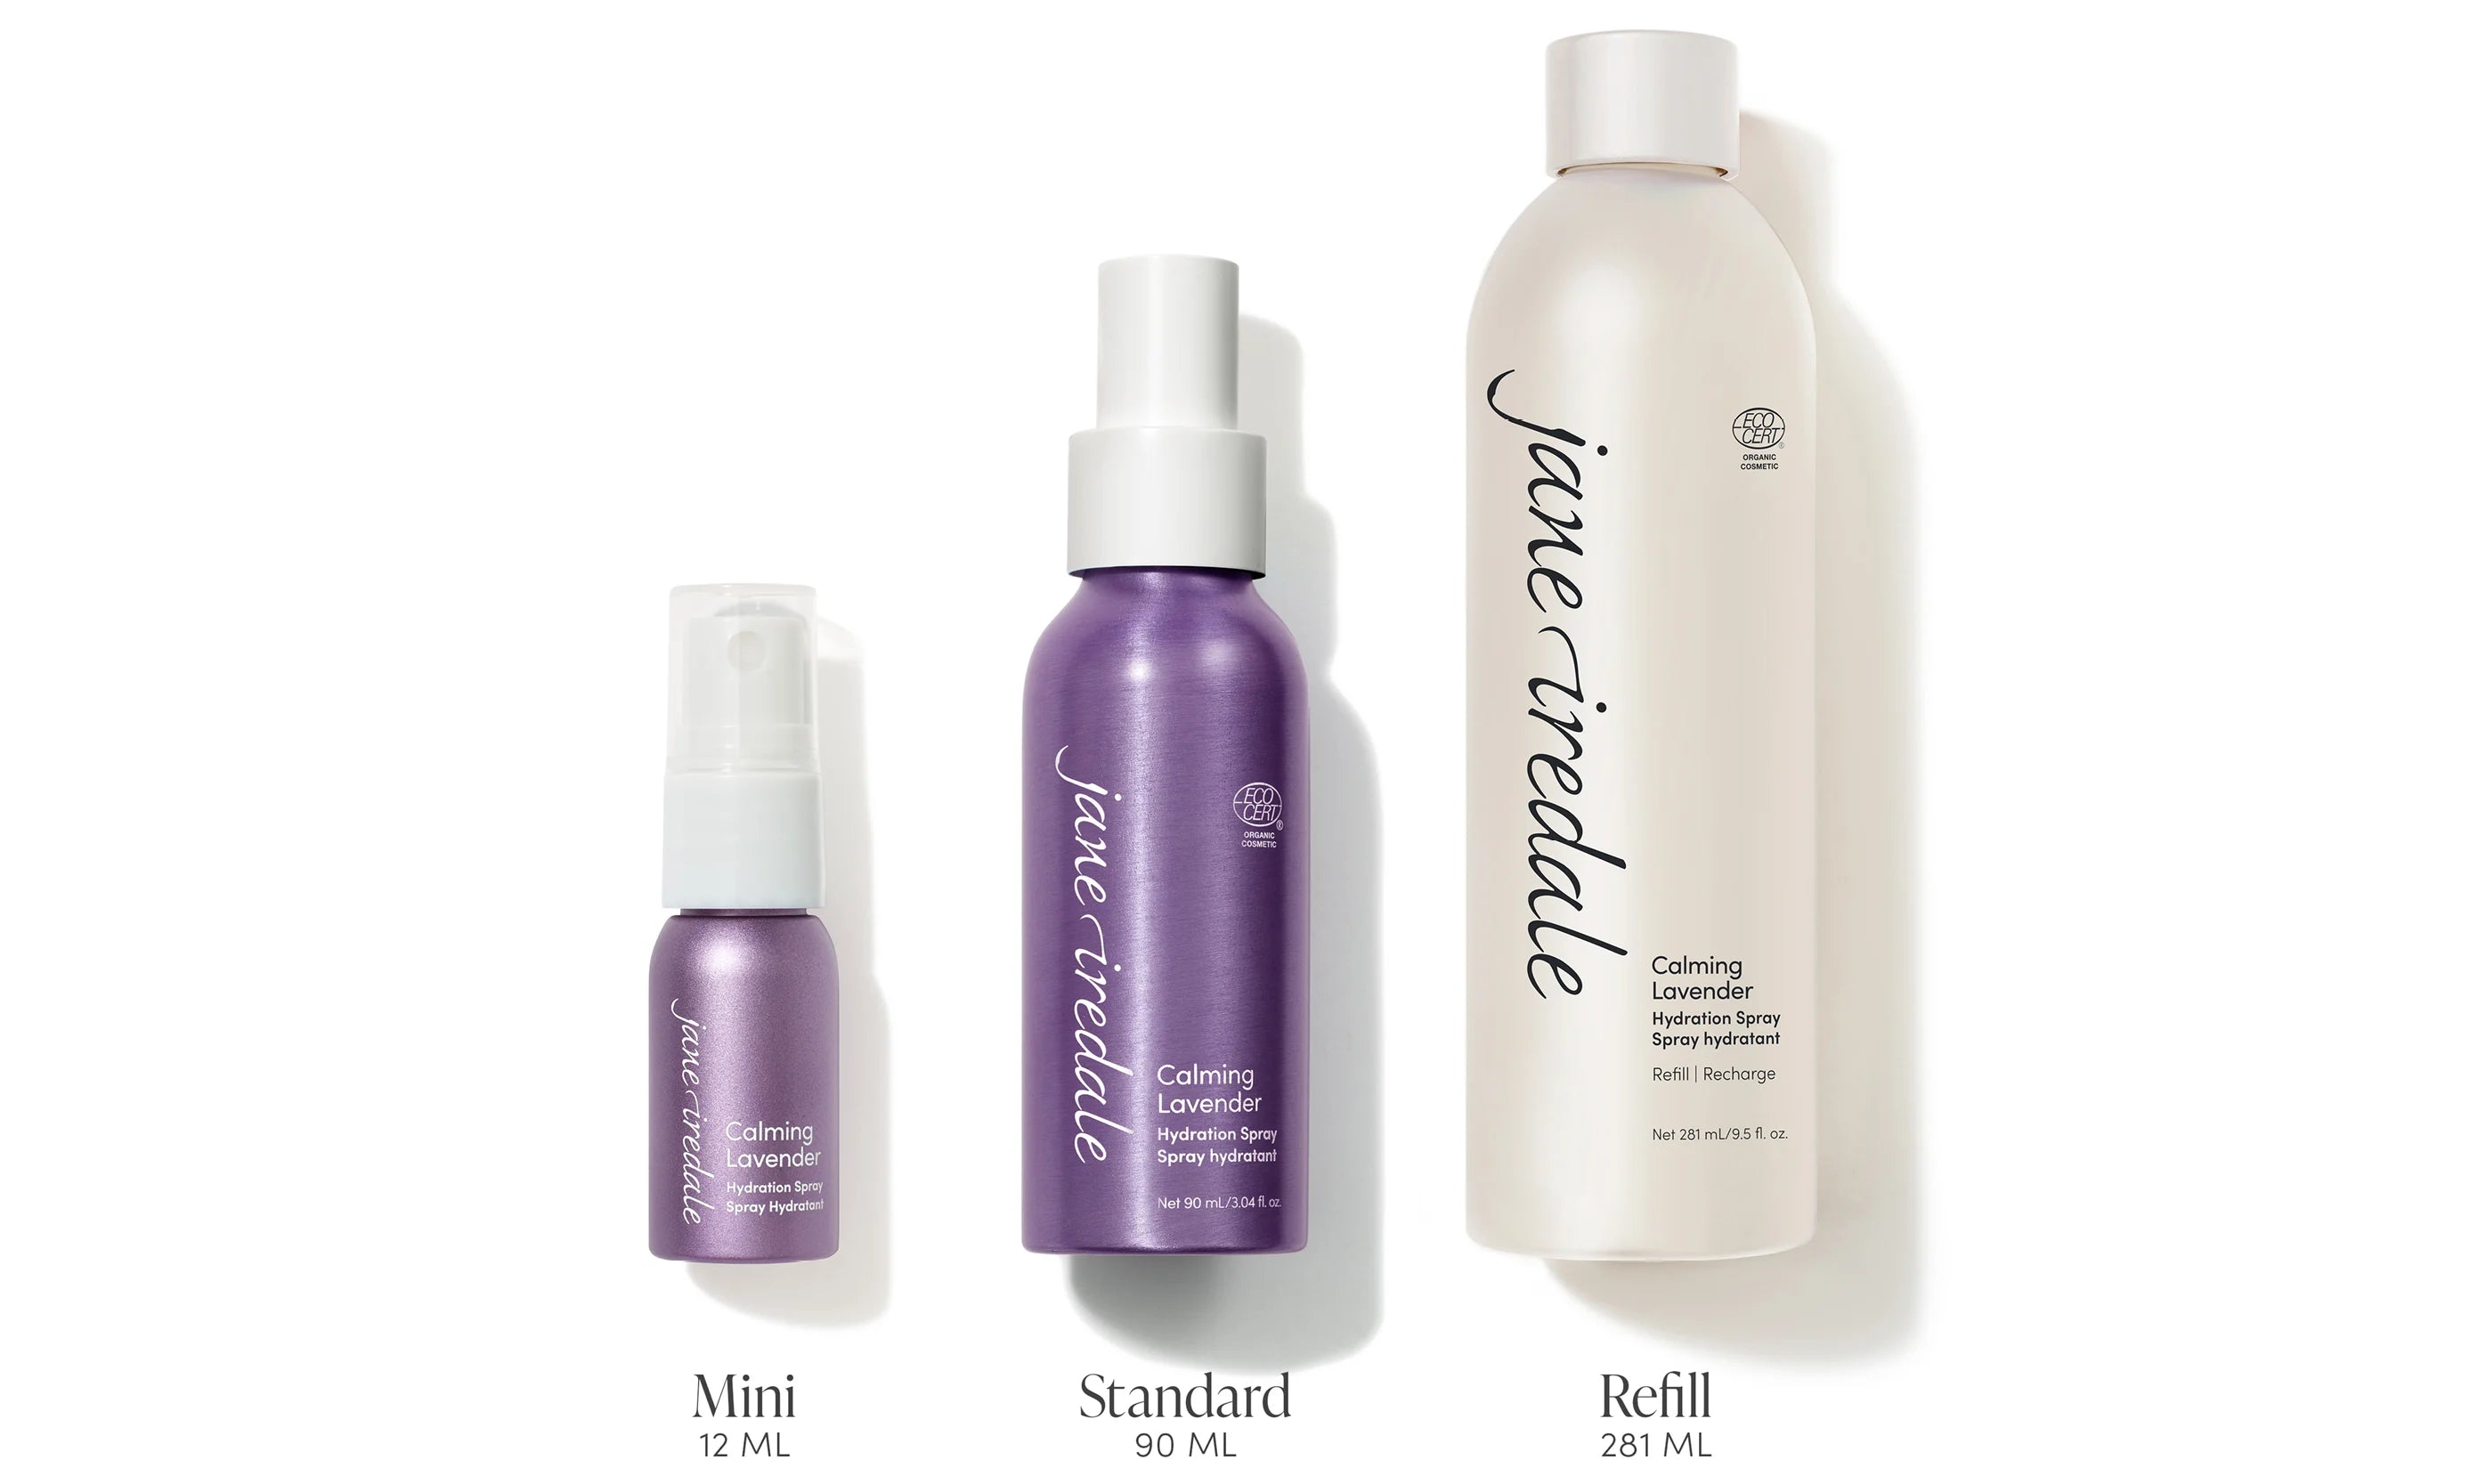 jane iredale Calming Lavender Hydration Spray available in three sizes